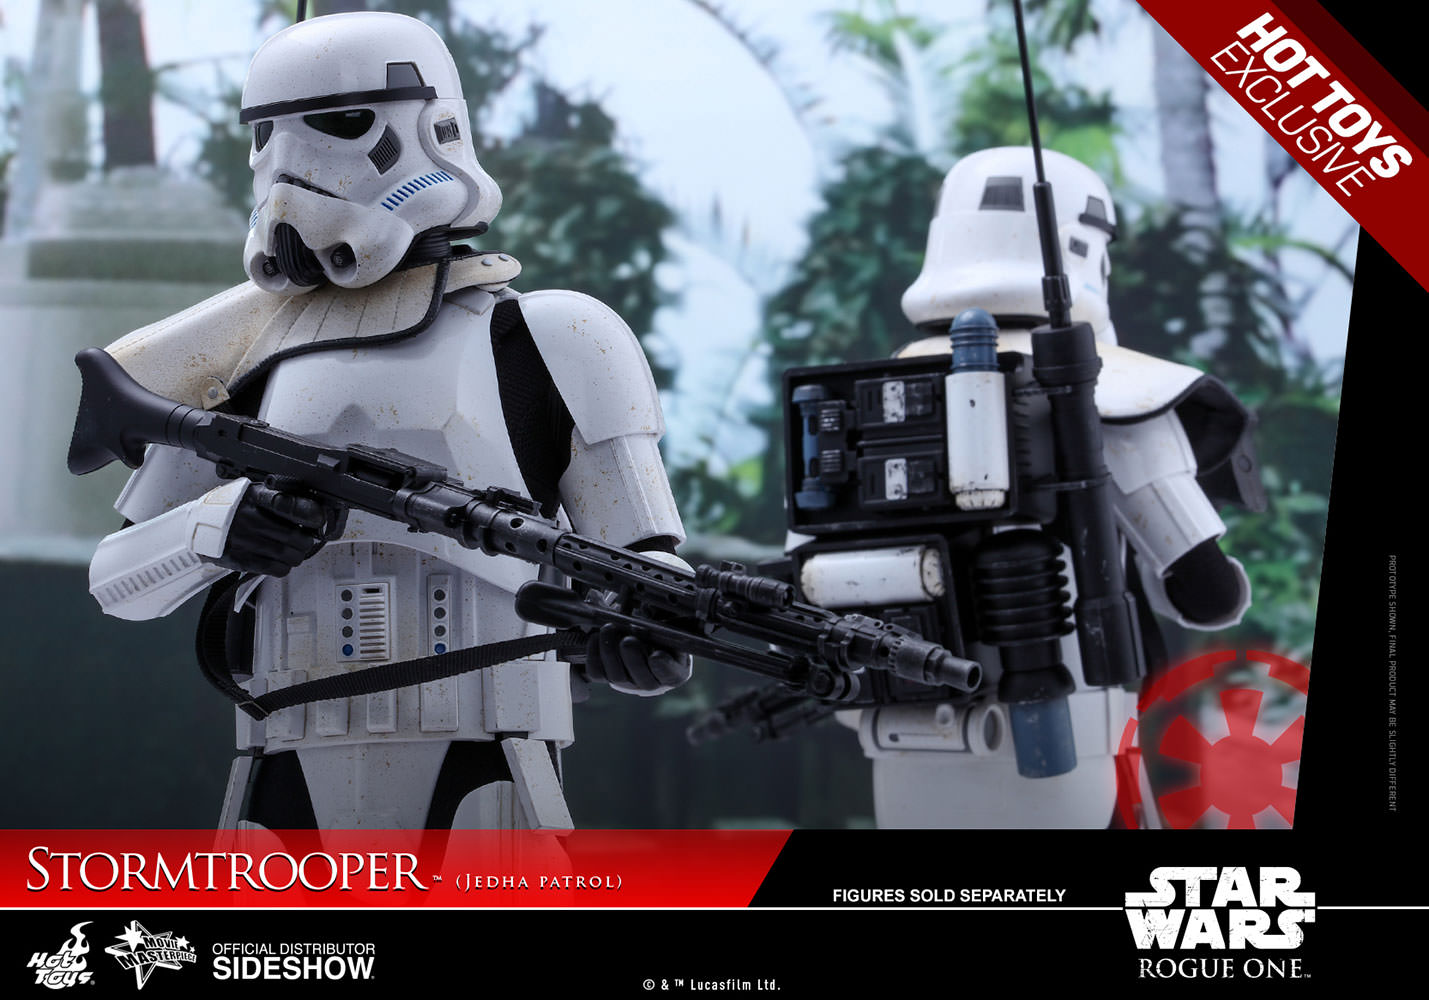 star-wars-rogue-one-stormtrooper-jedha-patrol-sixth-scale-hot-toys-902849-01.jpg